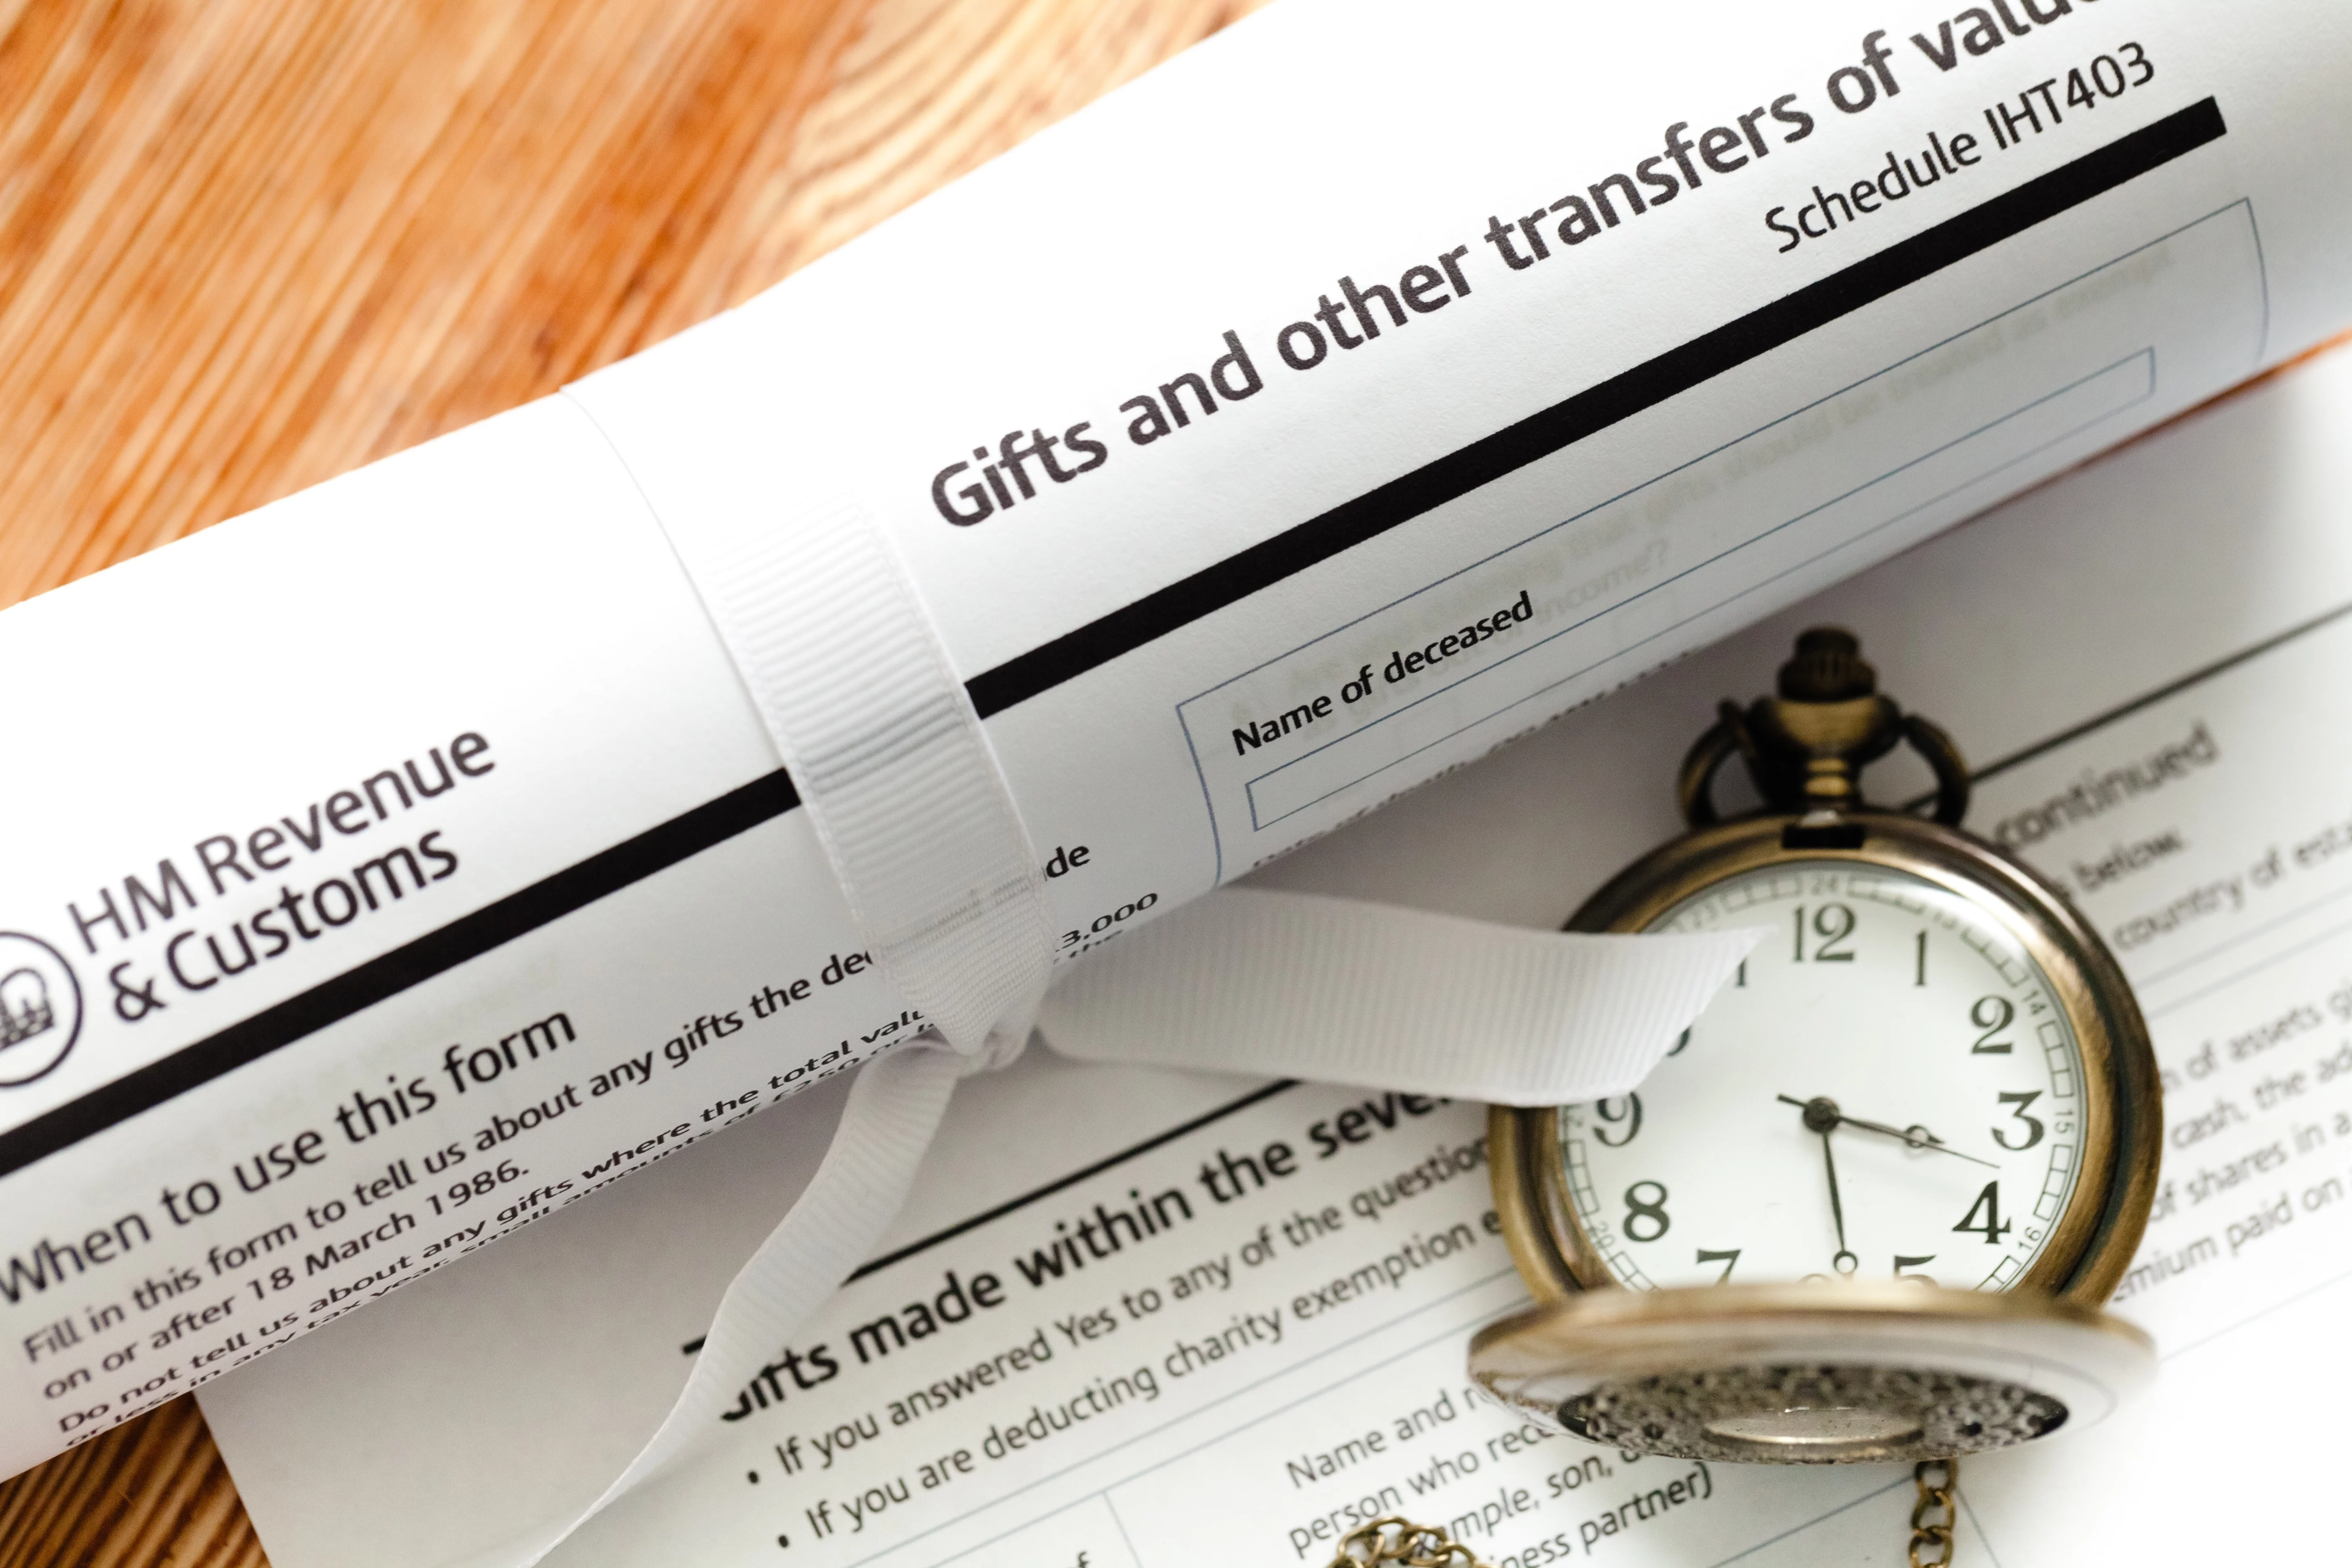 Document – Tax of gifts and other transports of value